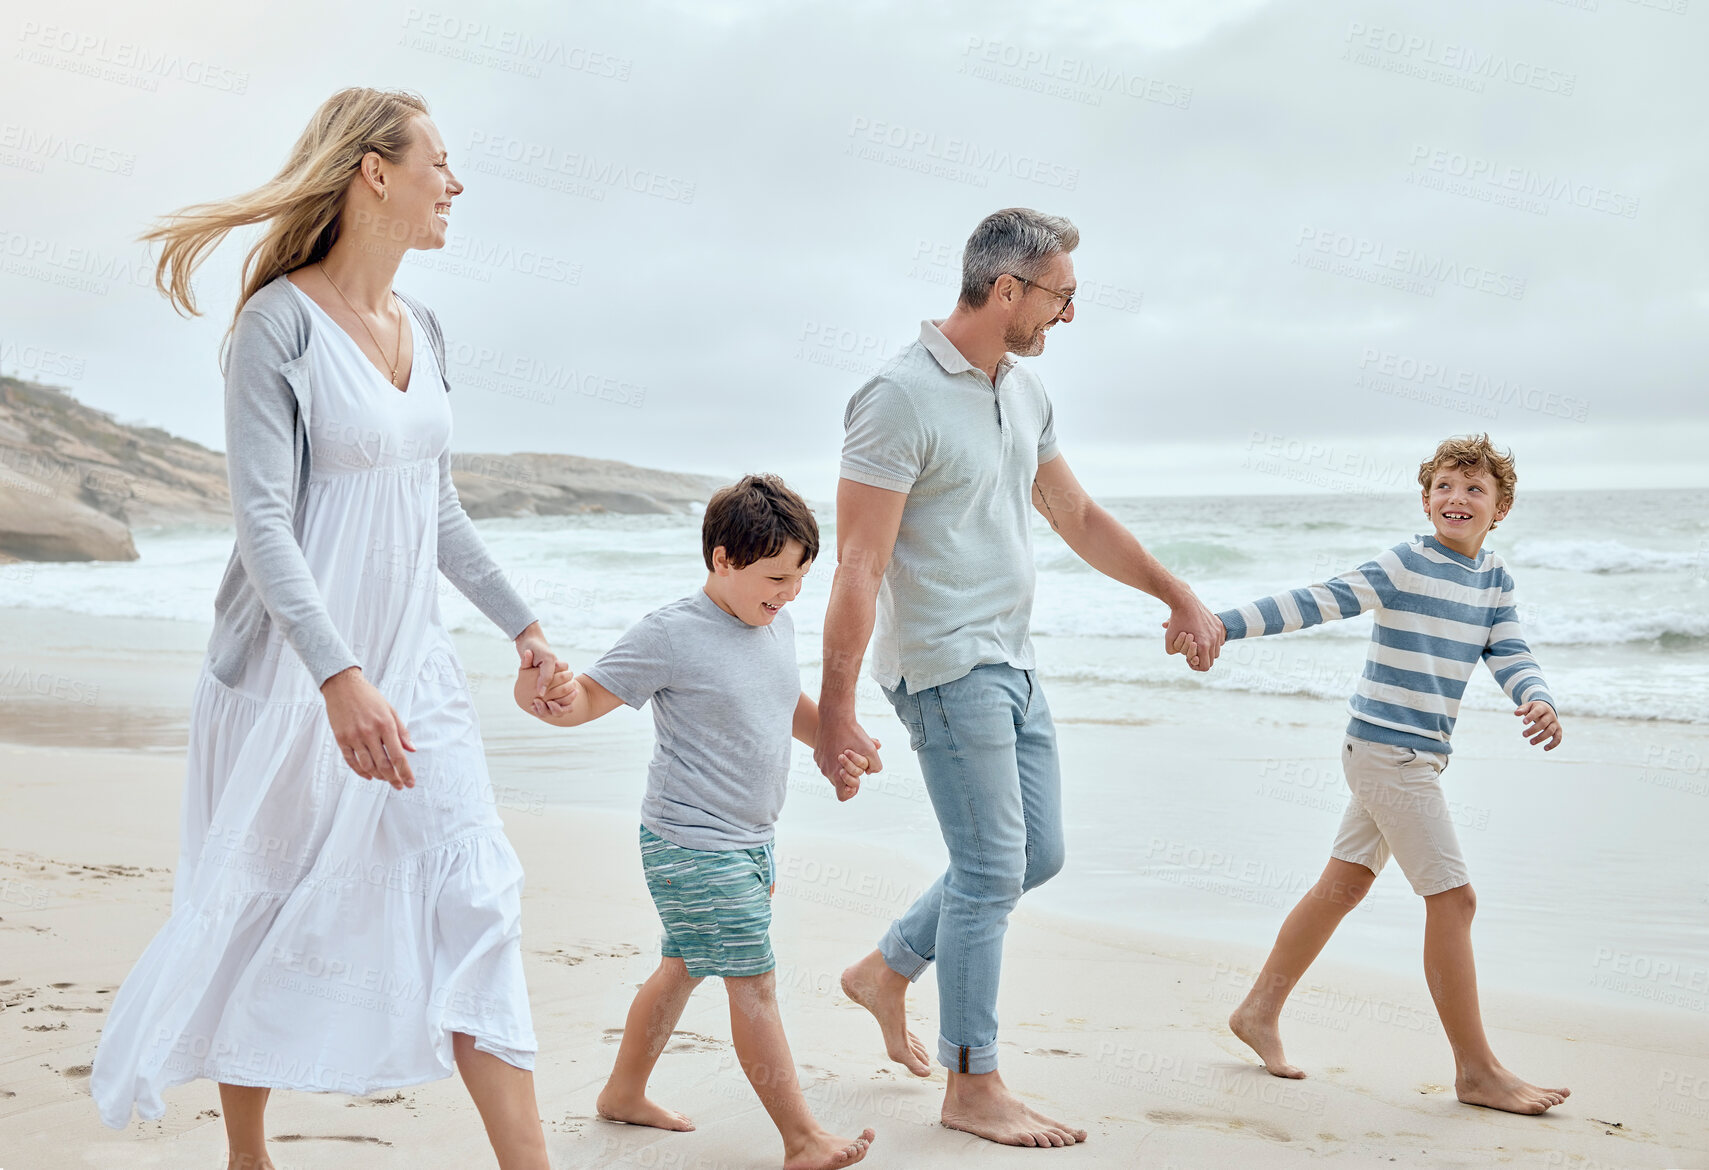 Buy stock photo Happy caucasian parents and kids holding hands while walking together along the beach shore during a relaxing fun family summer vacation. Loving mom and dad enjoying leisurely stroll while bonding with little sons